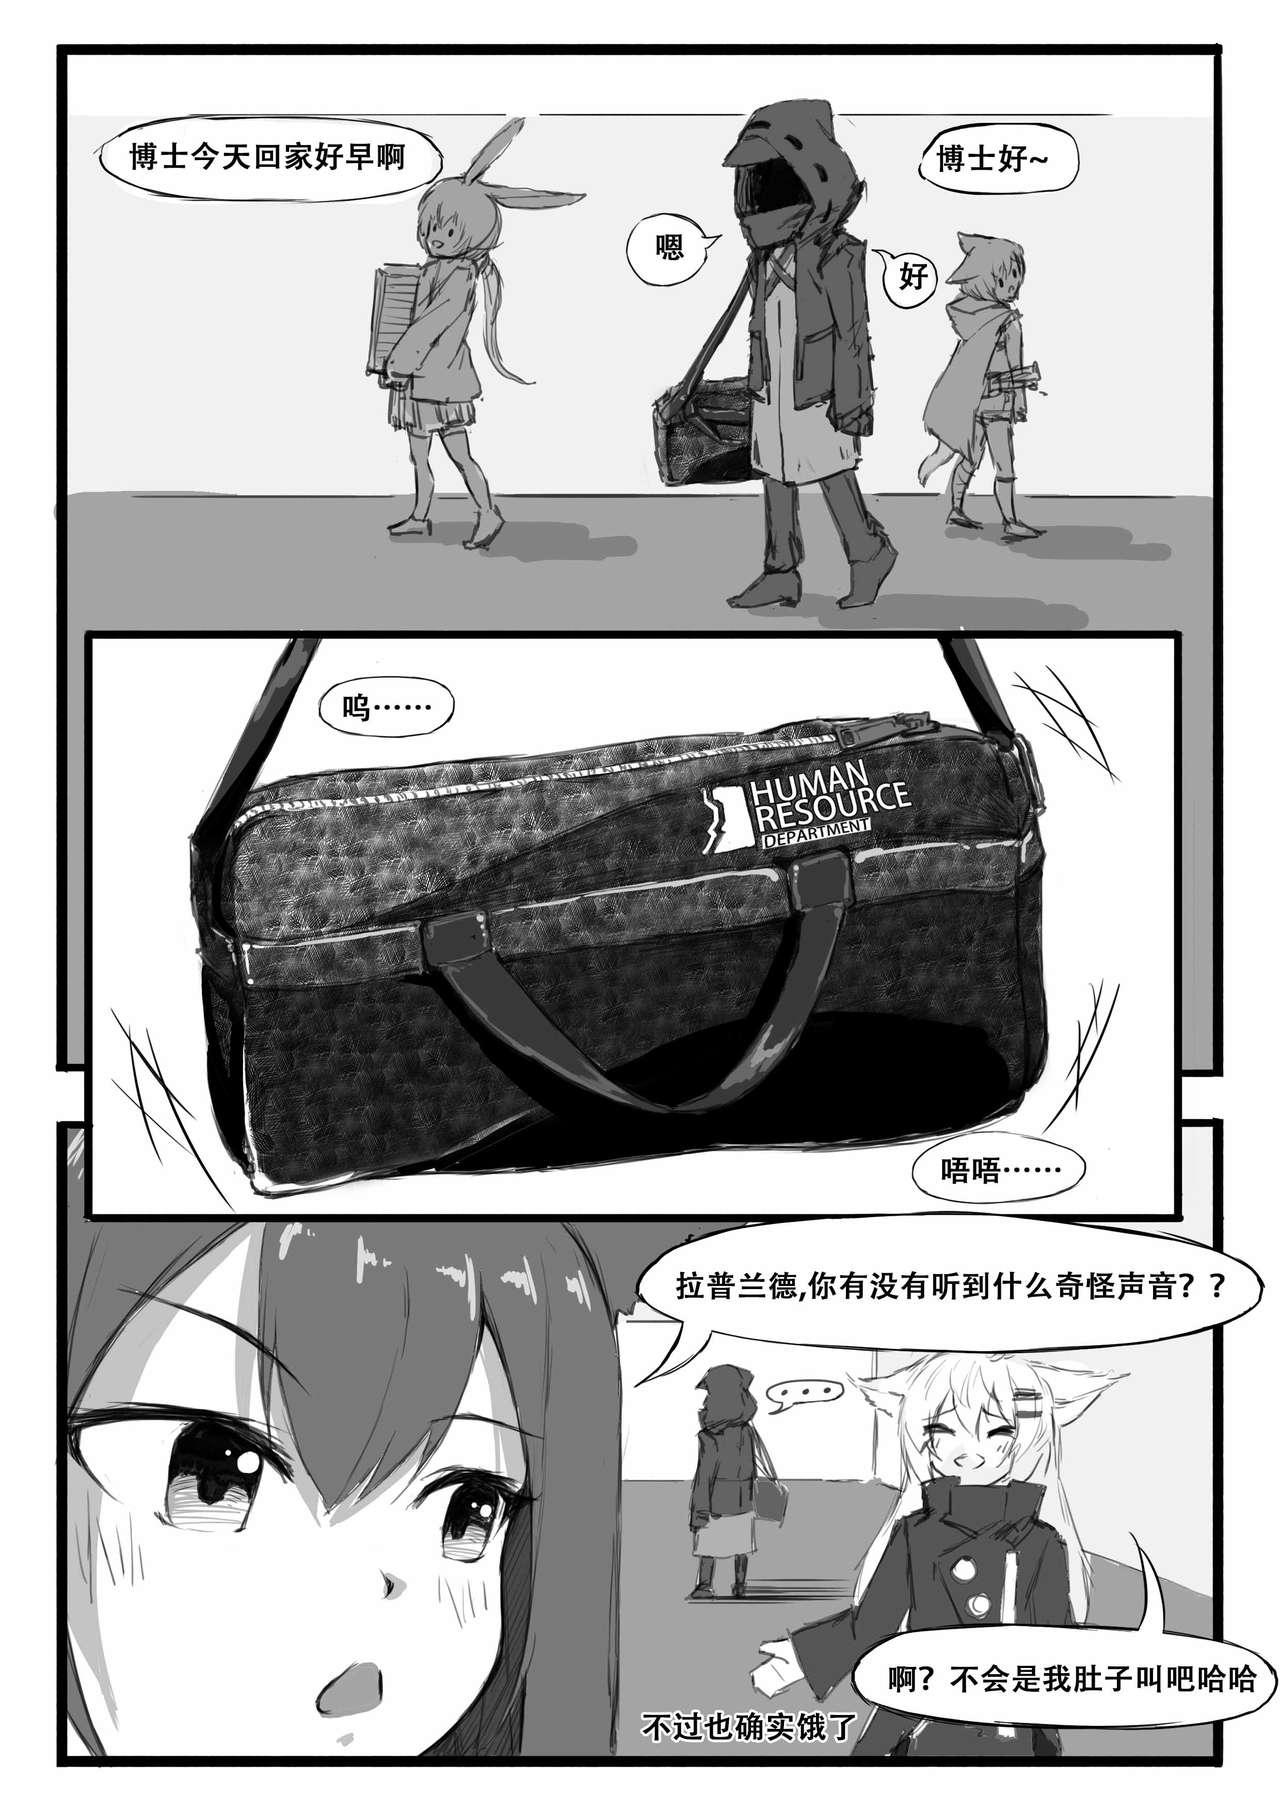 Wild 铃兰的单人任务 - Arknights Hair - Page 10